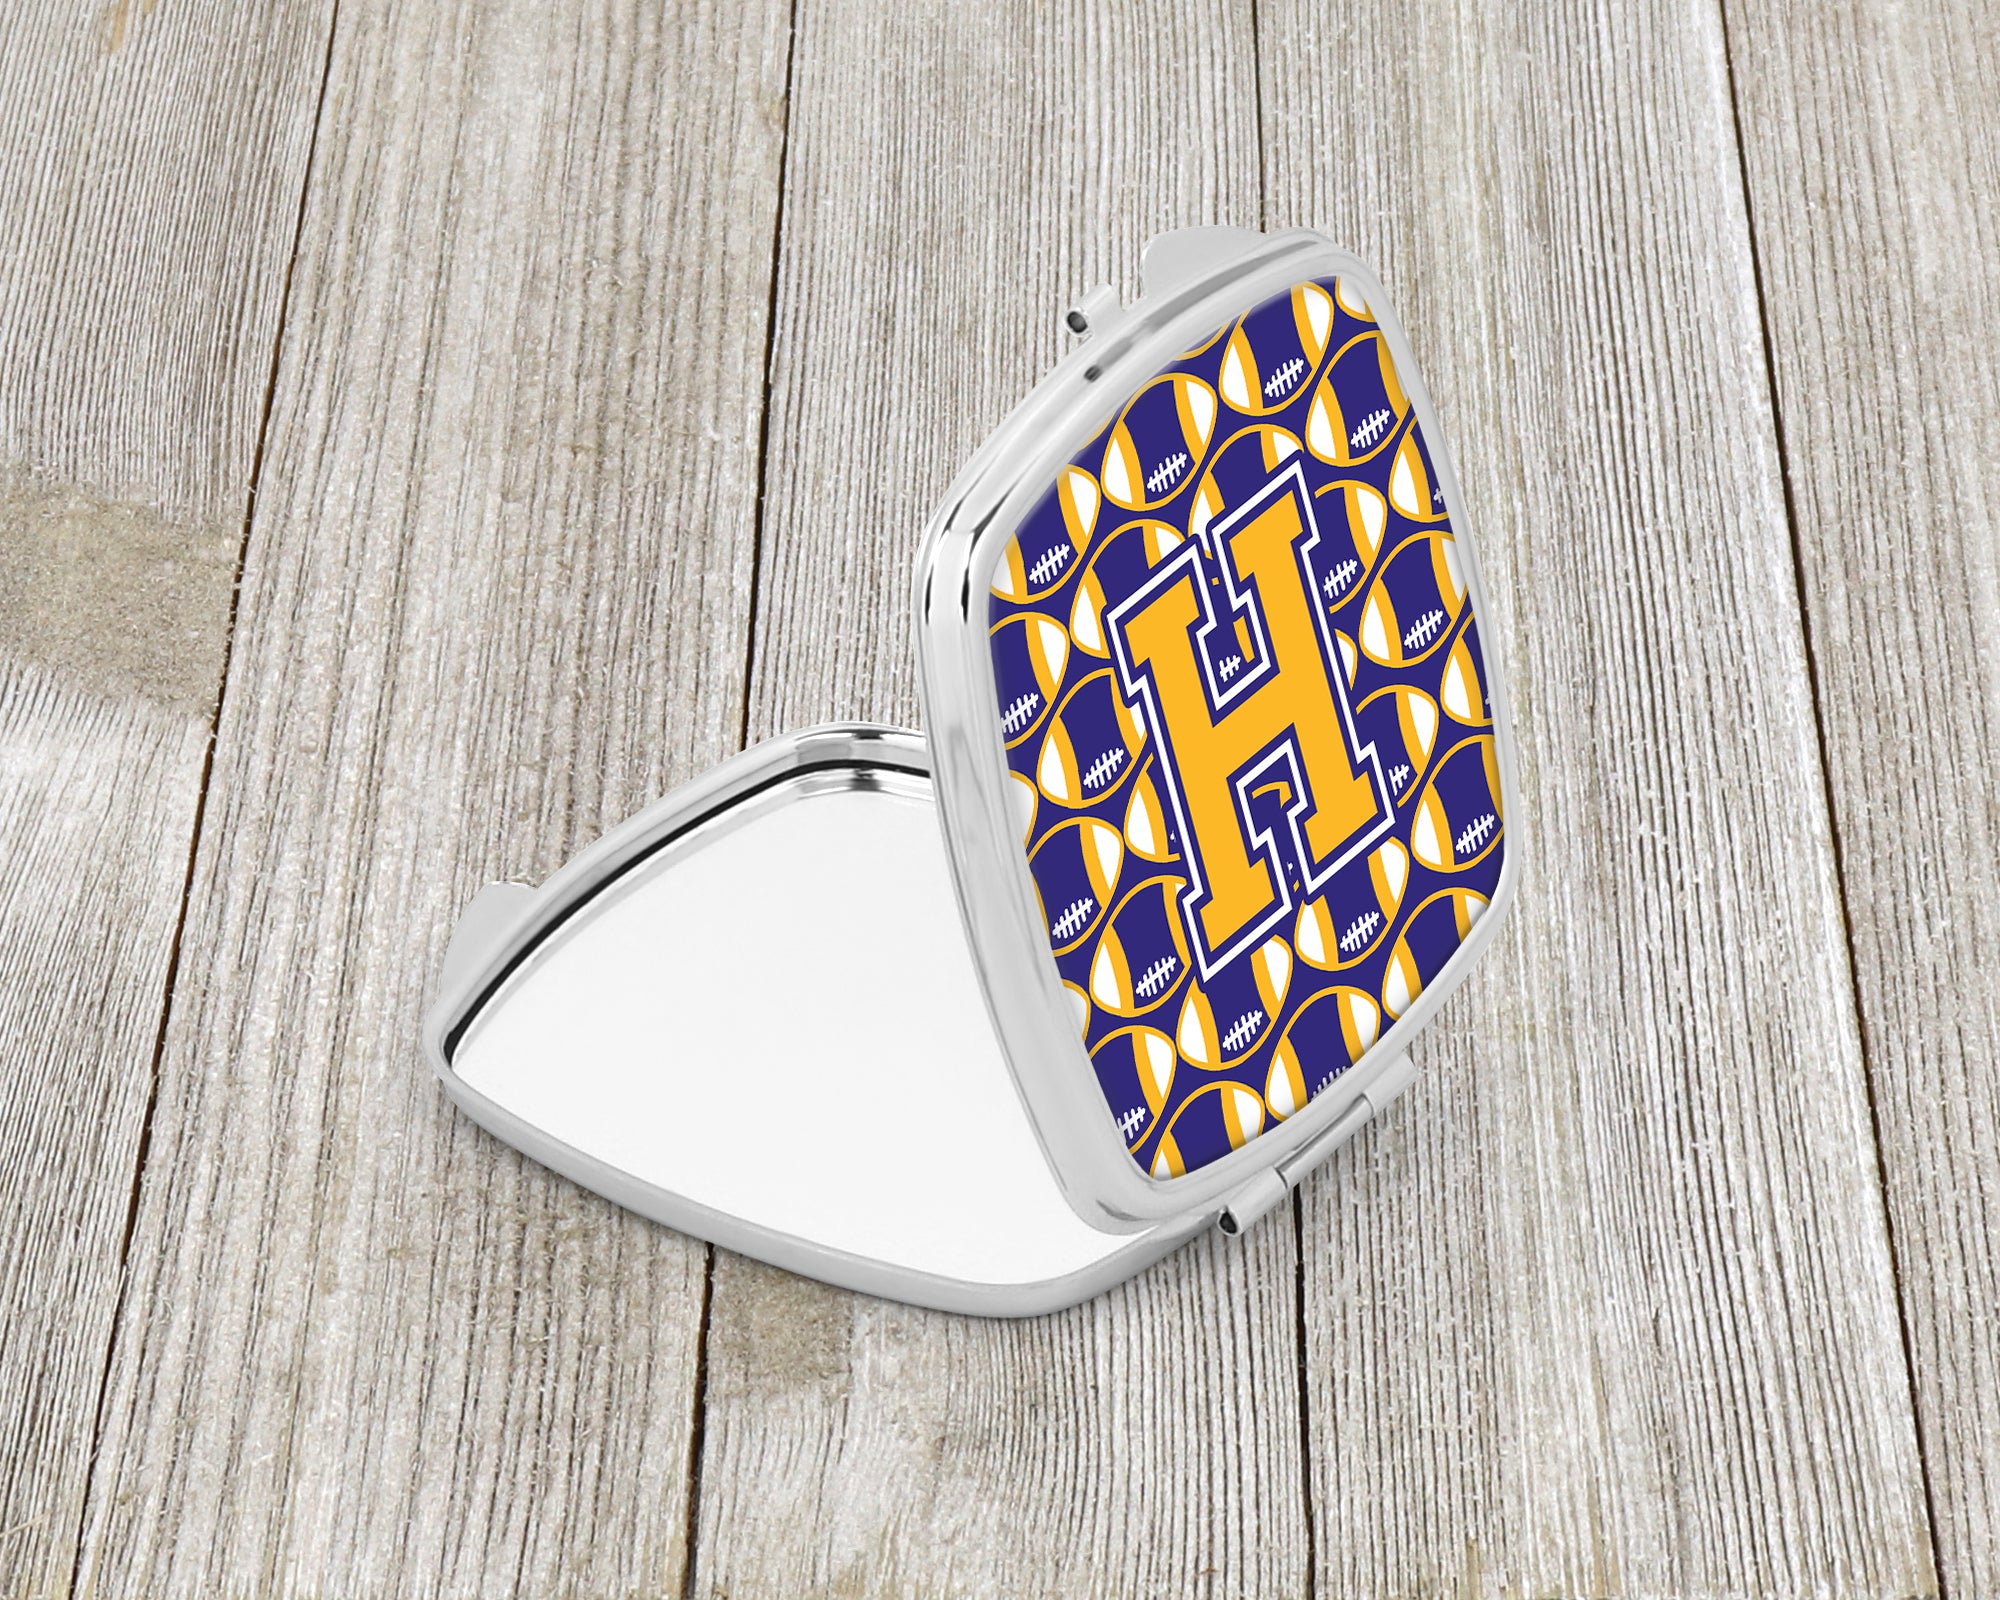 Letter H Football Purple and Gold Compact Mirror CJ1064-HSCM